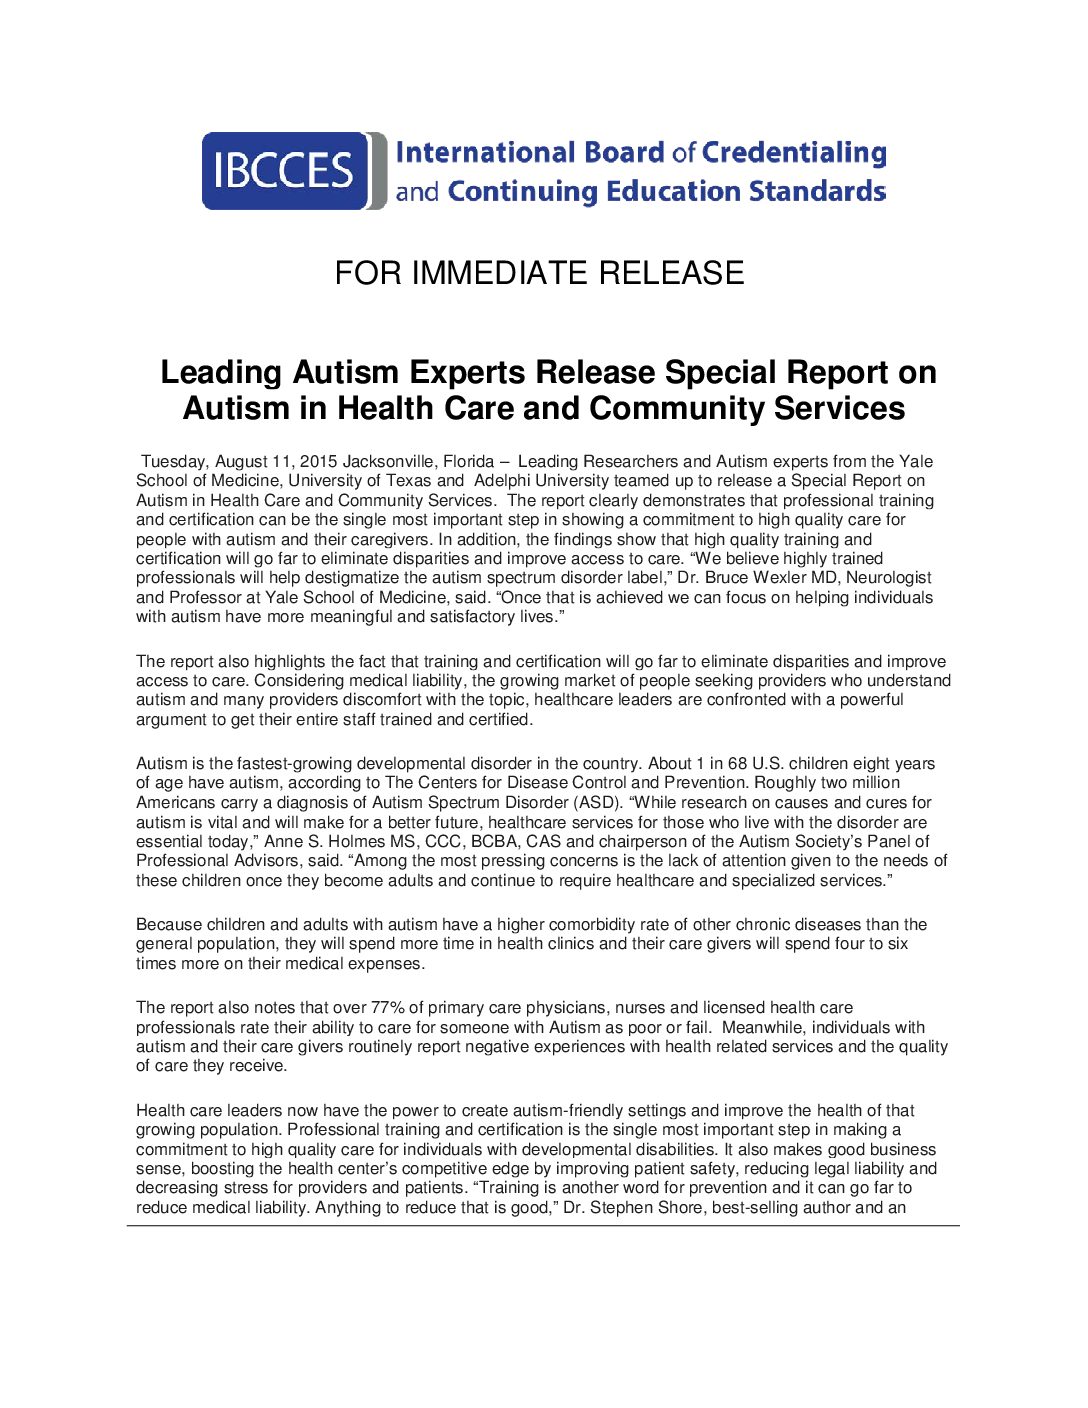 PR 081115 Leading Autism Experts Release Special Report on Autism